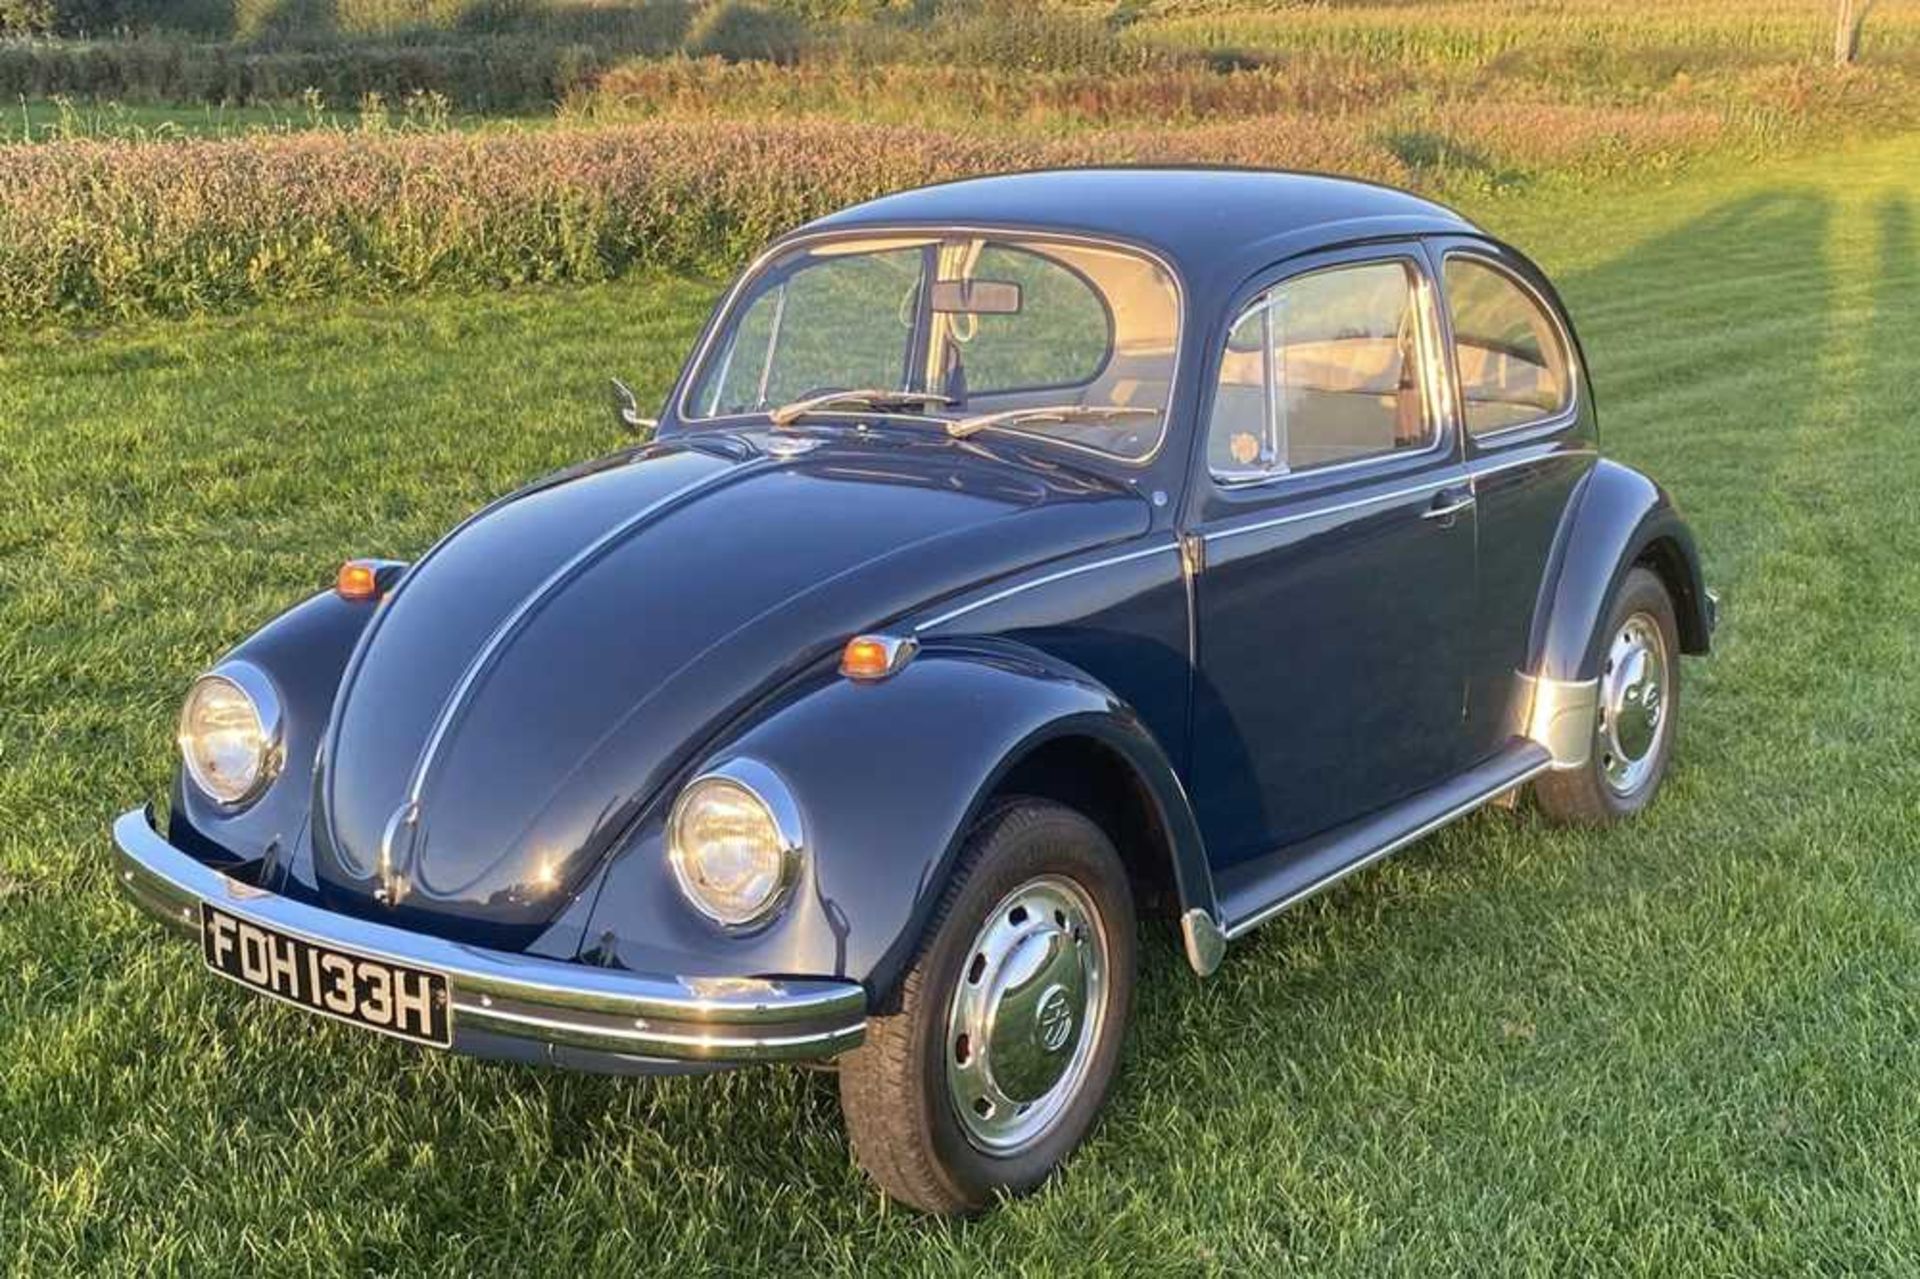 1970 VW Beetle 1300 Semi-Auto A very original example, suitable for a collector